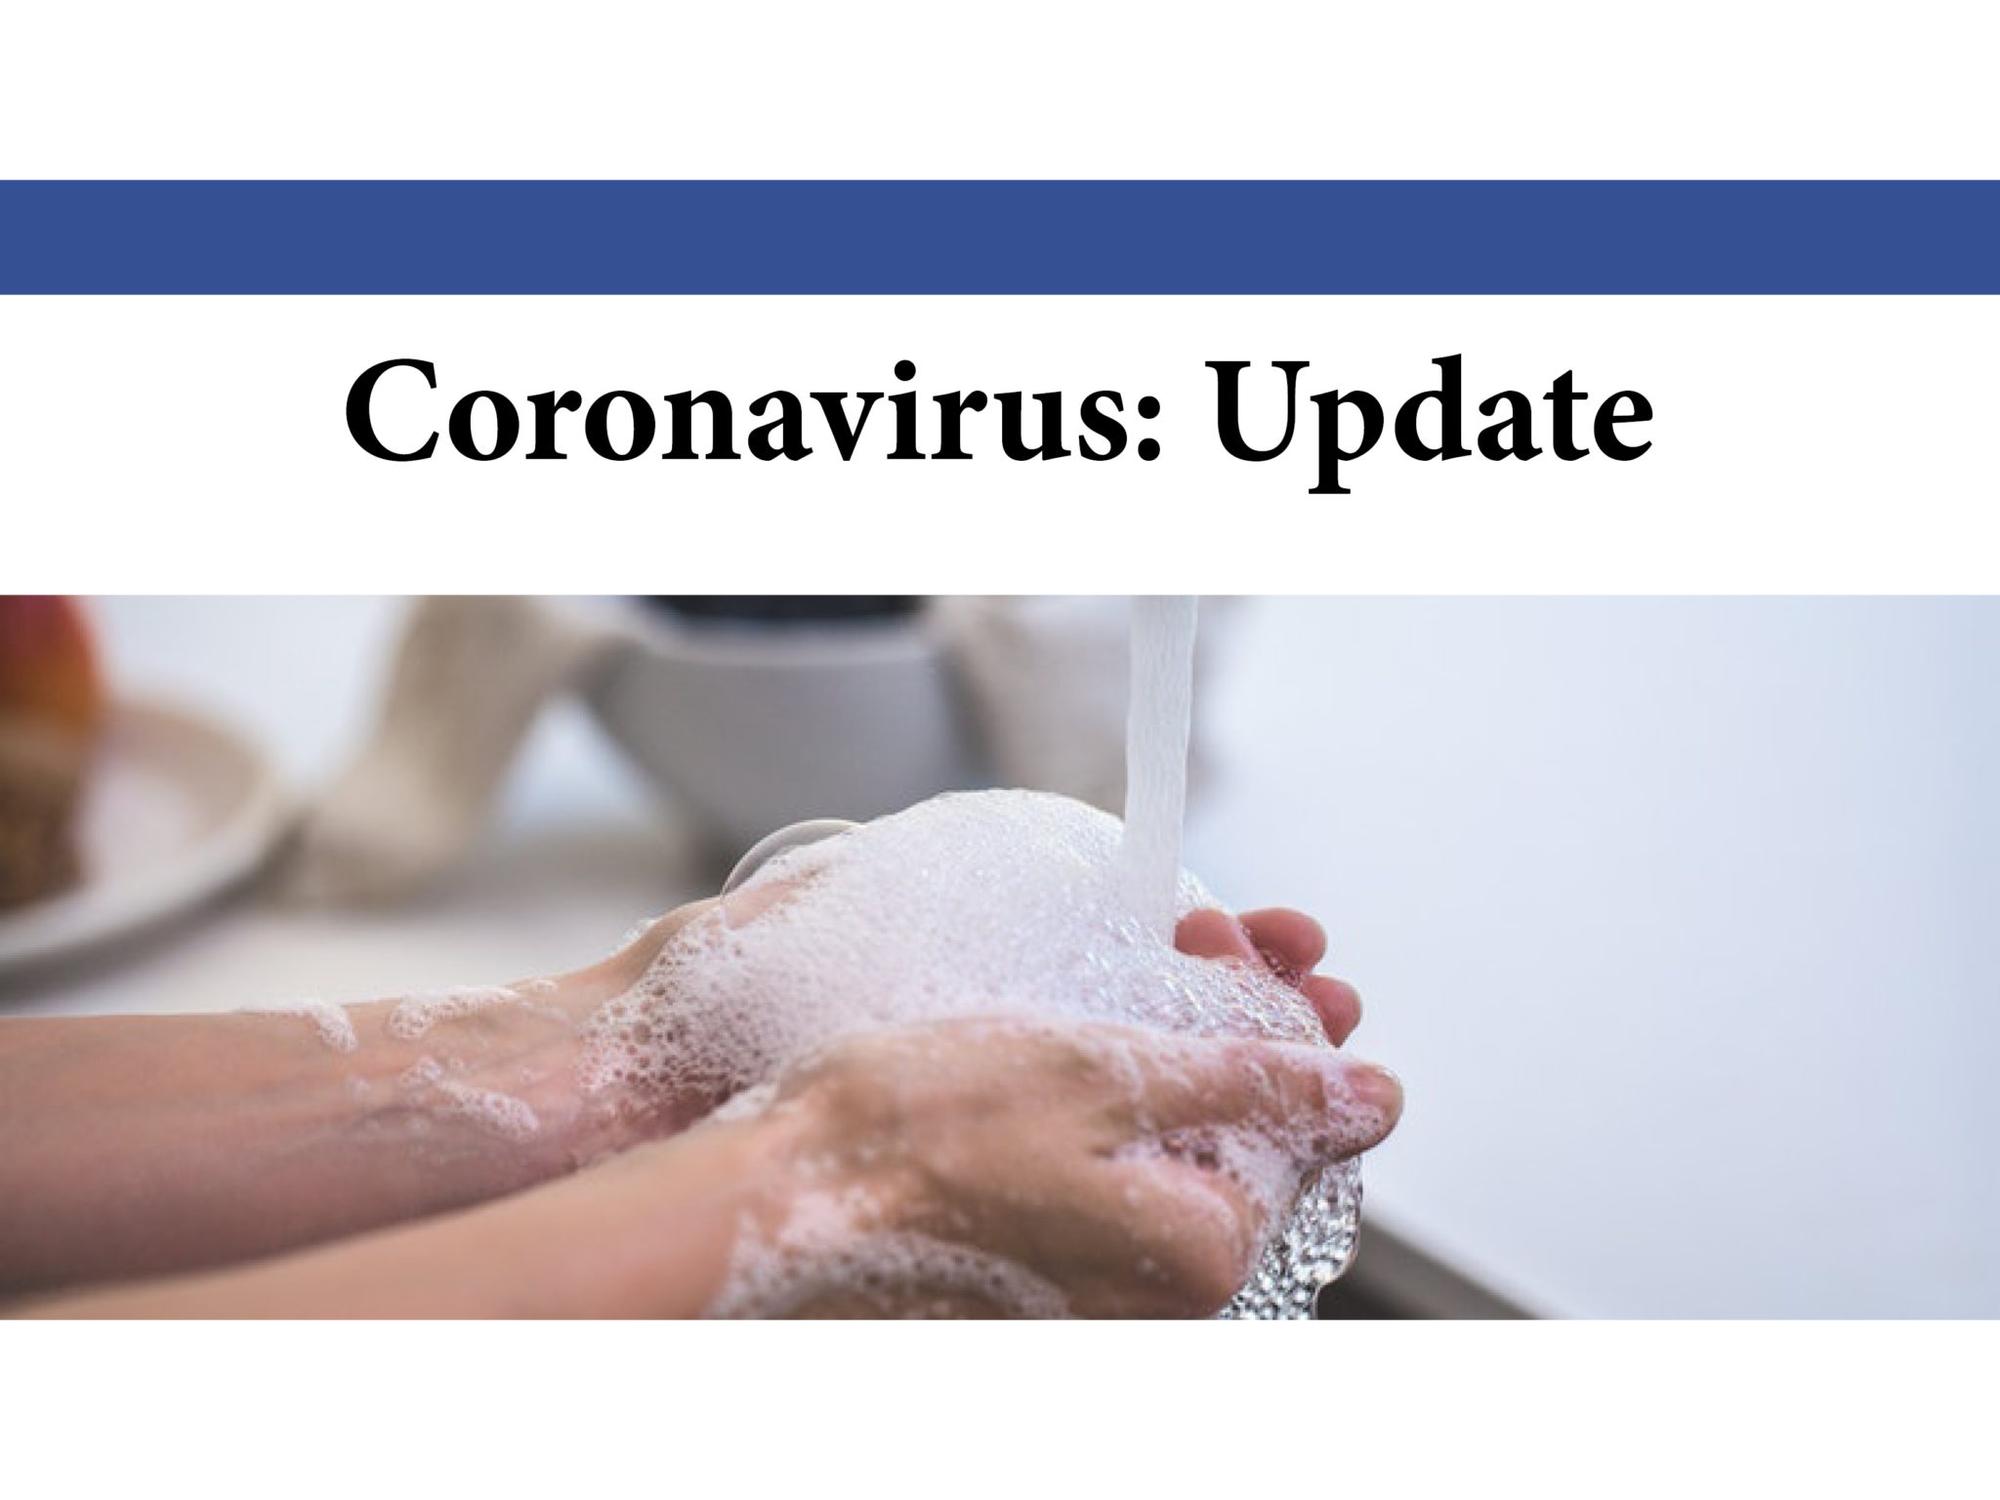 Two new active cases of COVID-19 in EOHU territory on Sunday, May 3